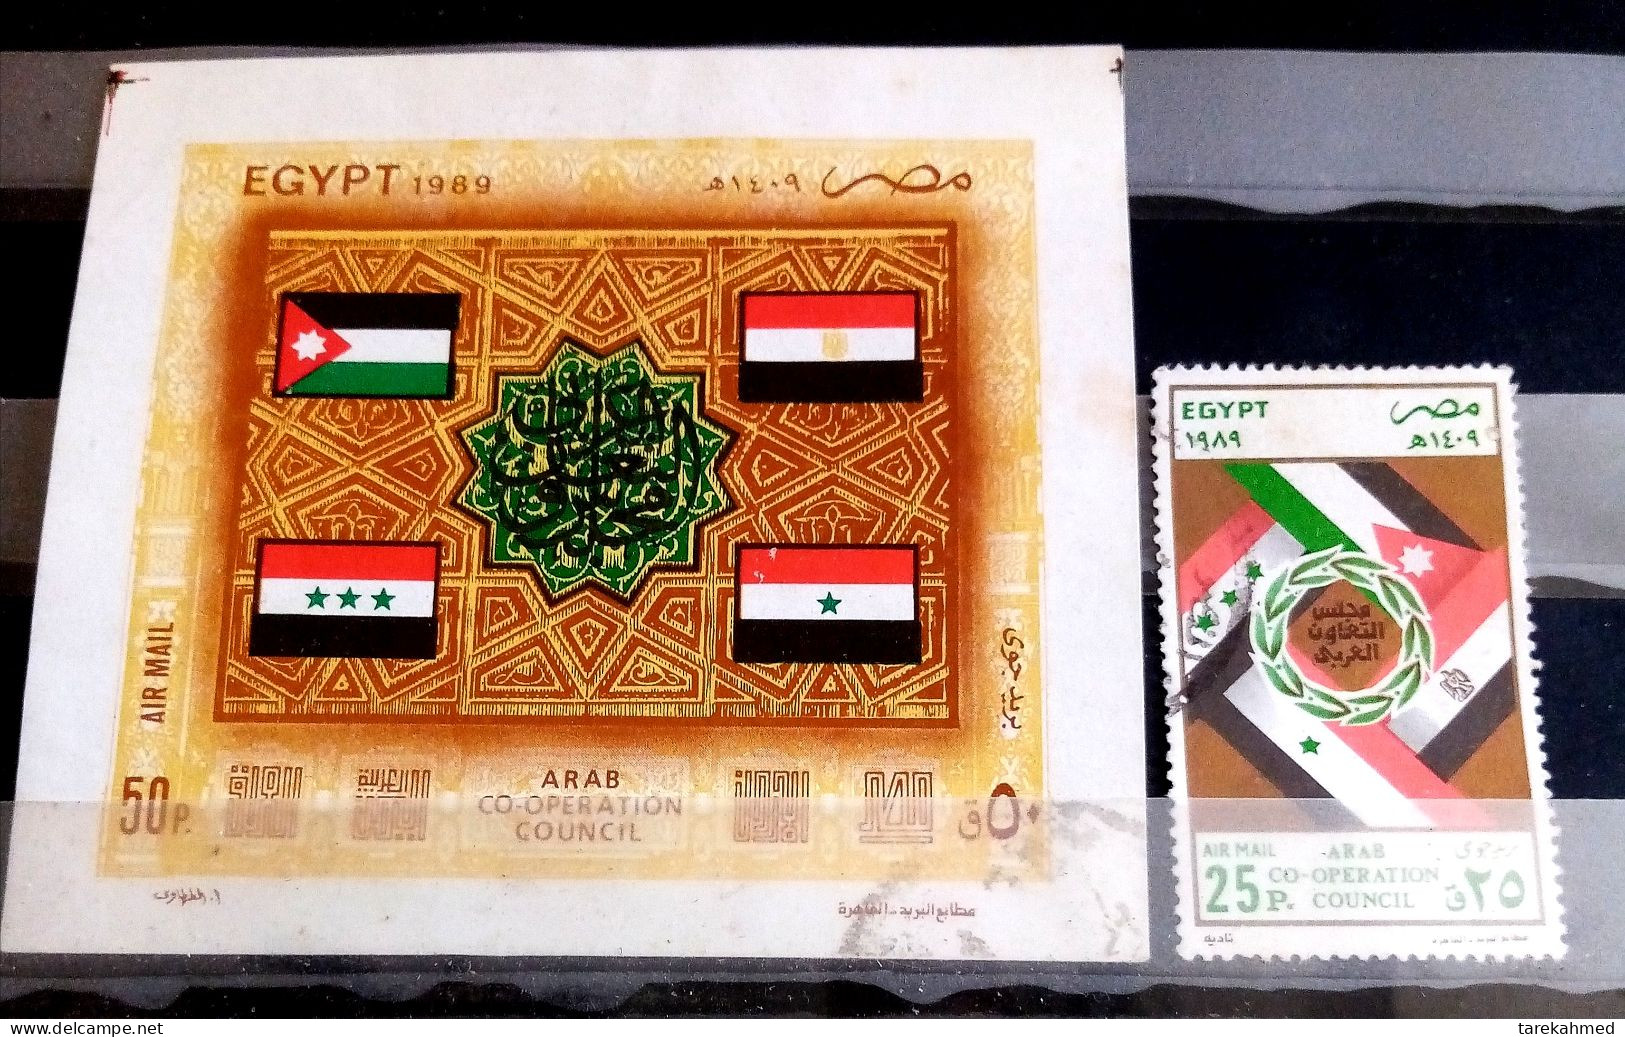 EGYPT 1989 , Complete SET, Stamp And S/S Of The ARAB CO-OPERATION COUNCIL, Flags, Airmail, MNH. - Nuovi